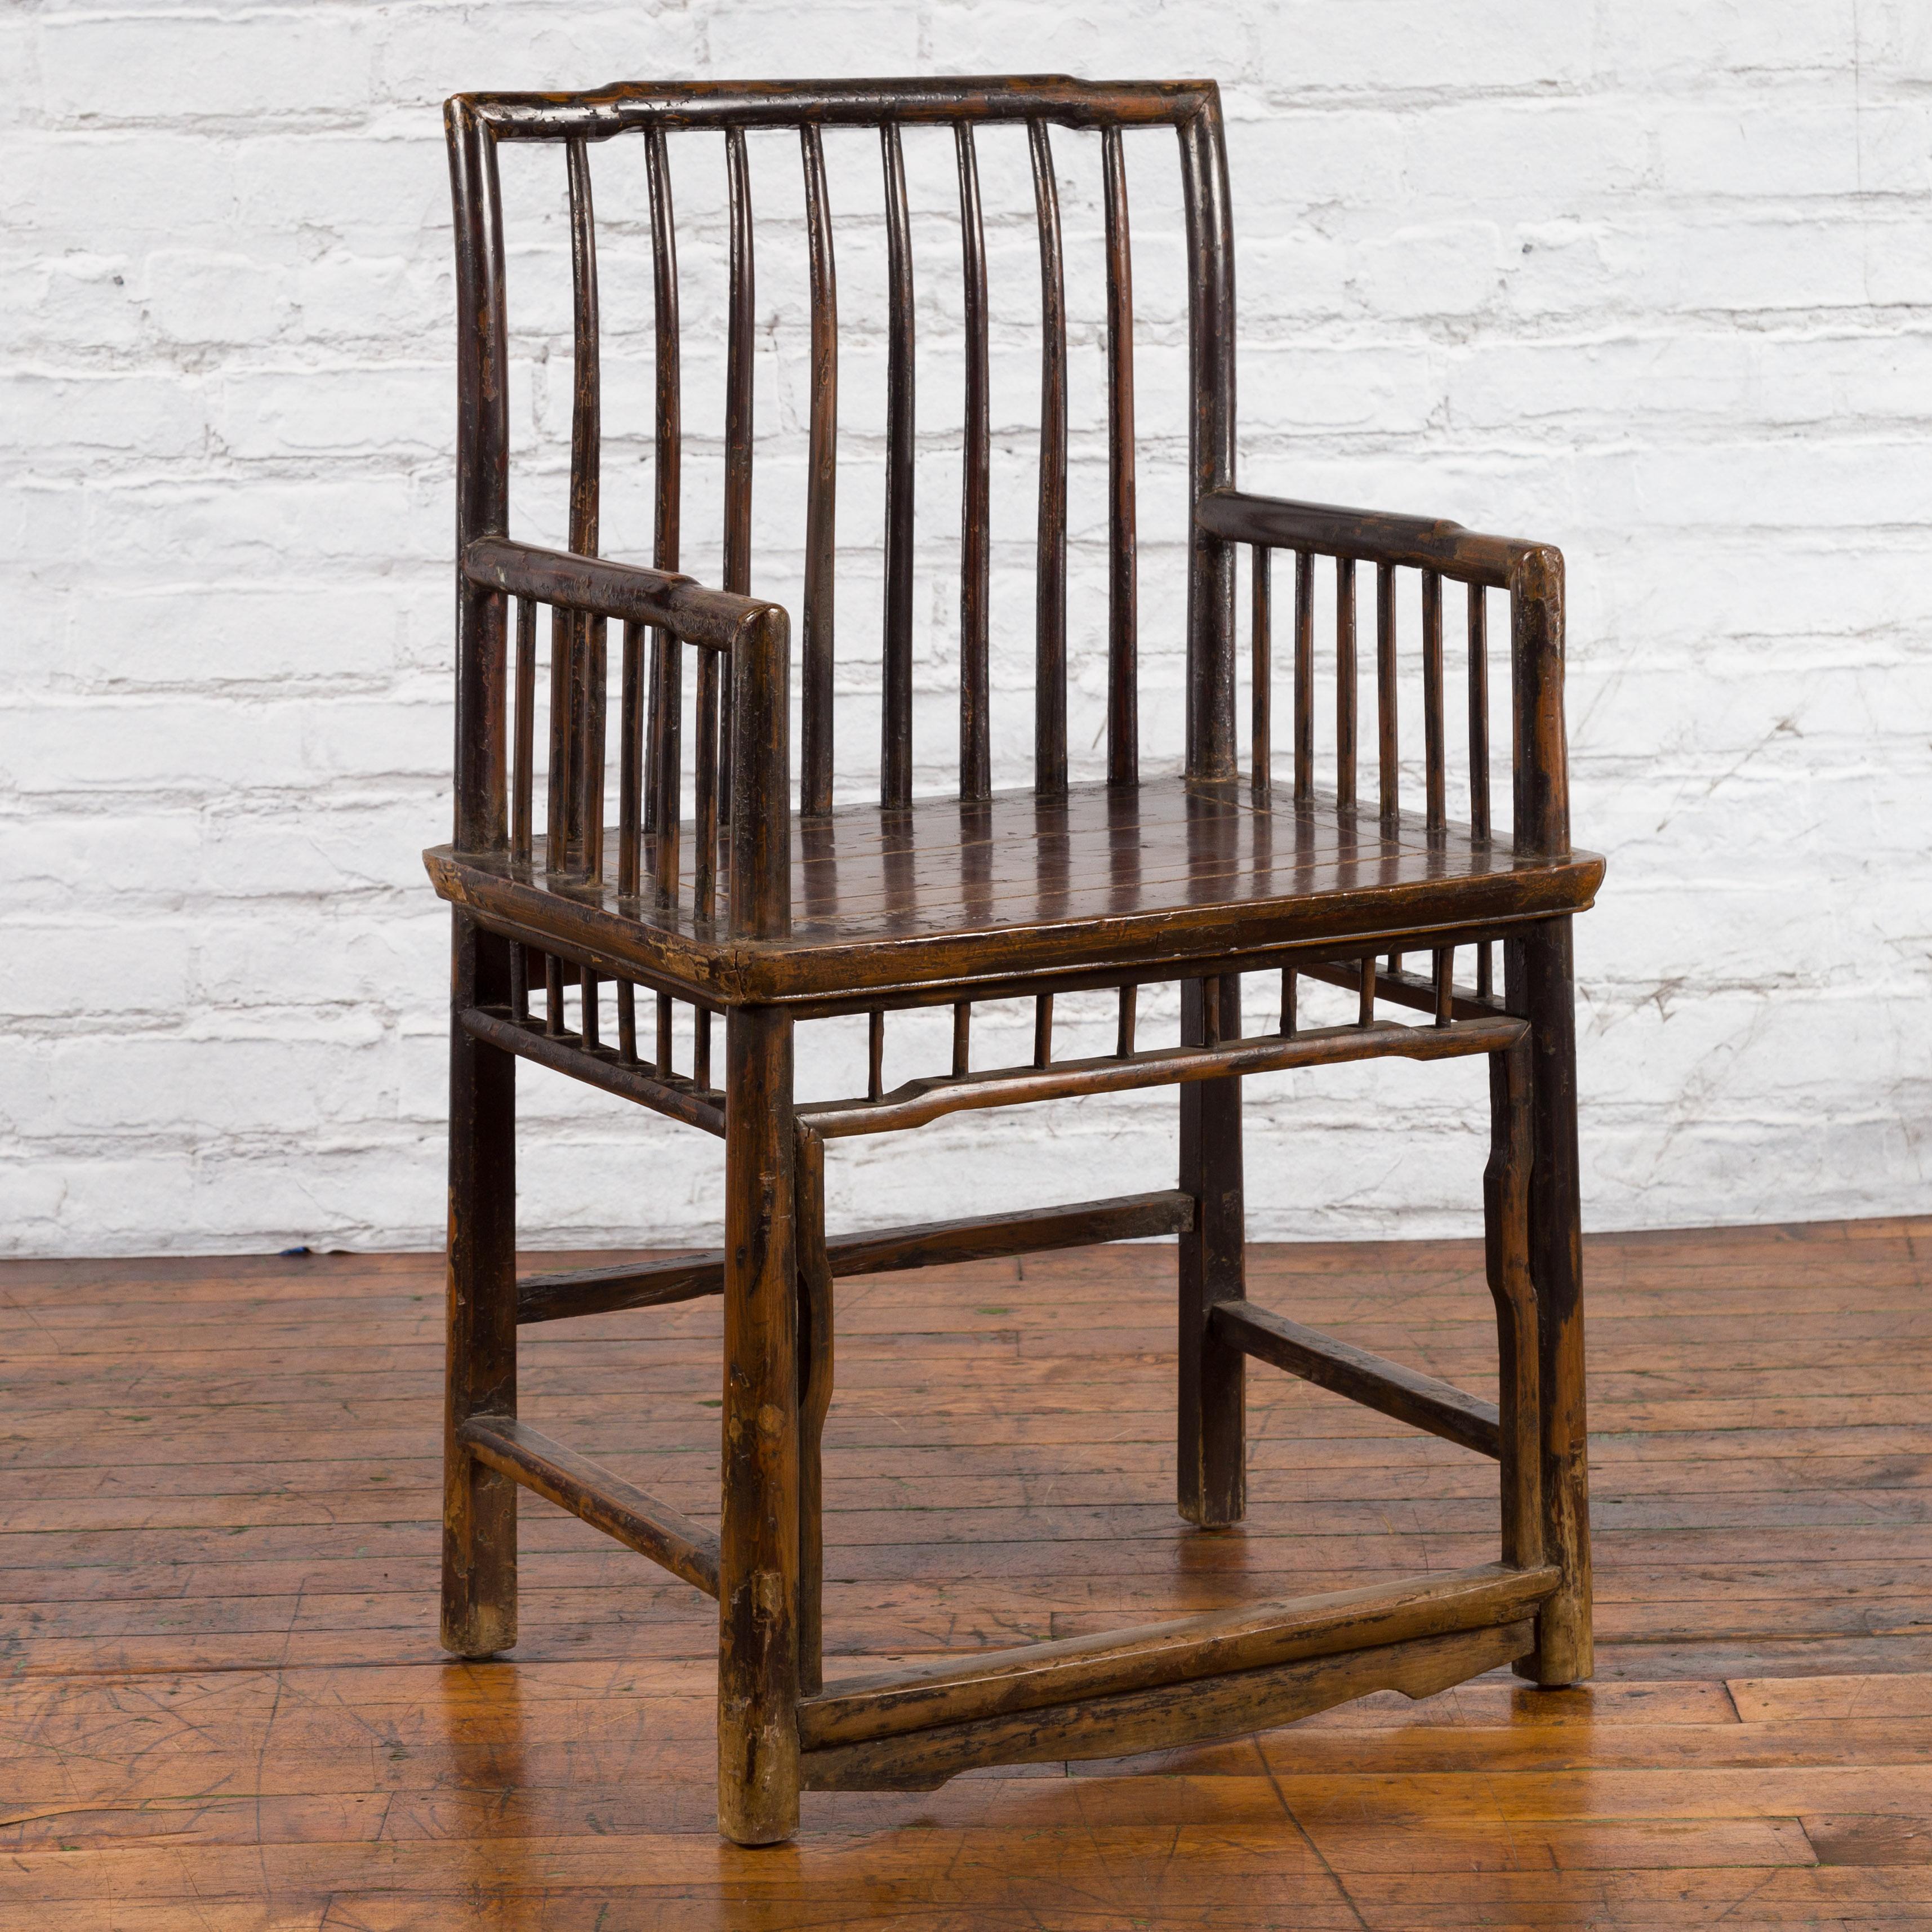 Chinese Qing Dynasty 19th Century Elmwood Armchair with Slatted Back and Arms For Sale 5